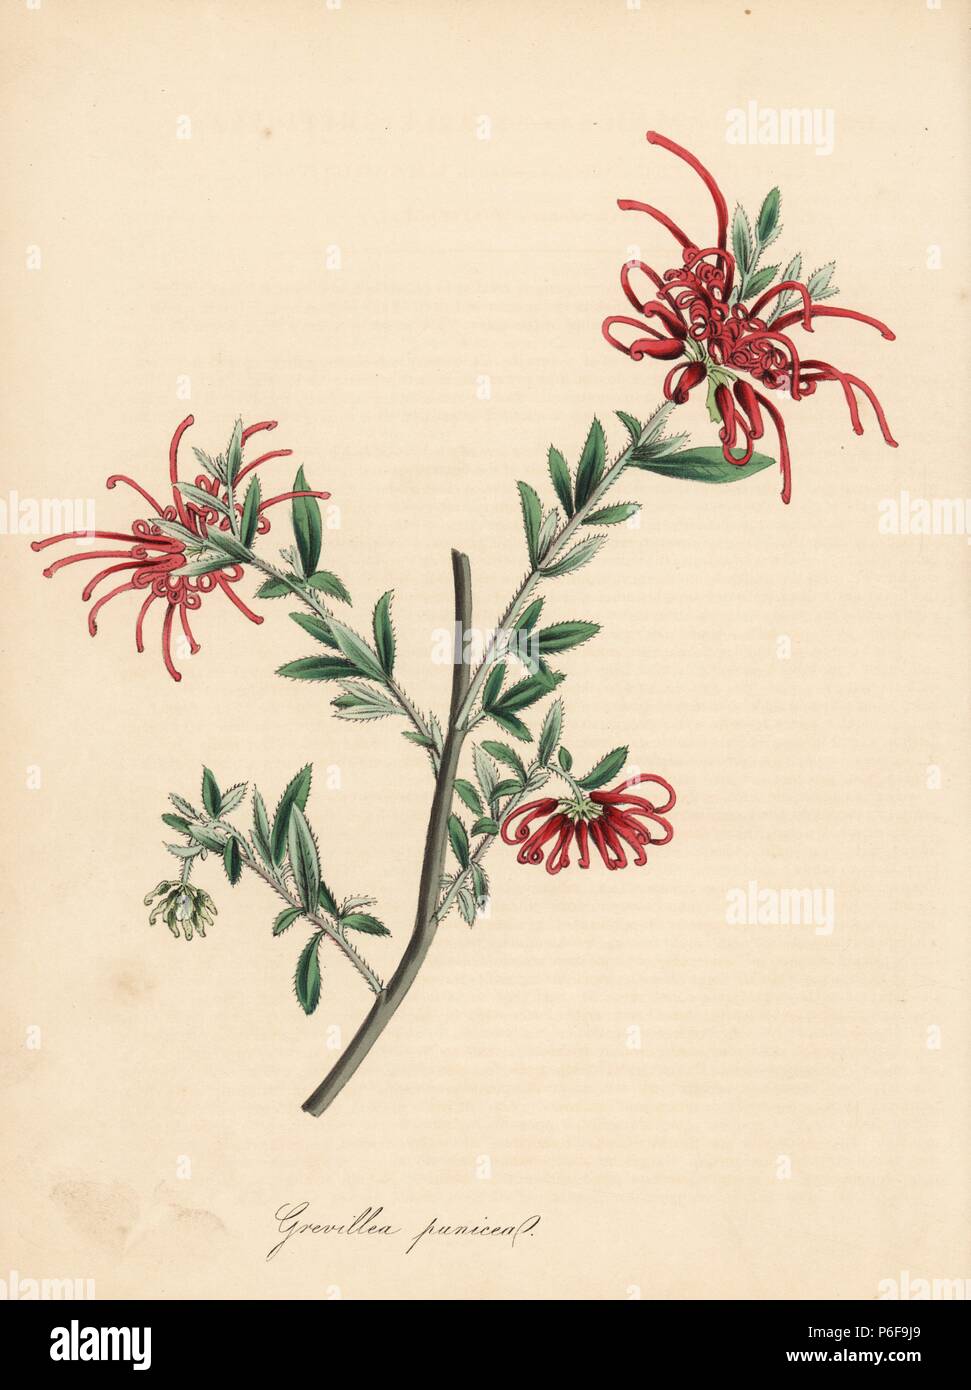 Red spider flower or scarlet grevillea, Grevillea punicea. Handcoloured zincograph by C. Chabot drawn by Miss M. A. Burnett from her 'Plantae Utiliores: or Illustrations of Useful Plants,' Whittaker, London, 1842. Miss Burnett drew the botanical illustrations, but the text was chiefly by her late brother, British botanist Gilbert Thomas Burnett (1800-1835). Stock Photo